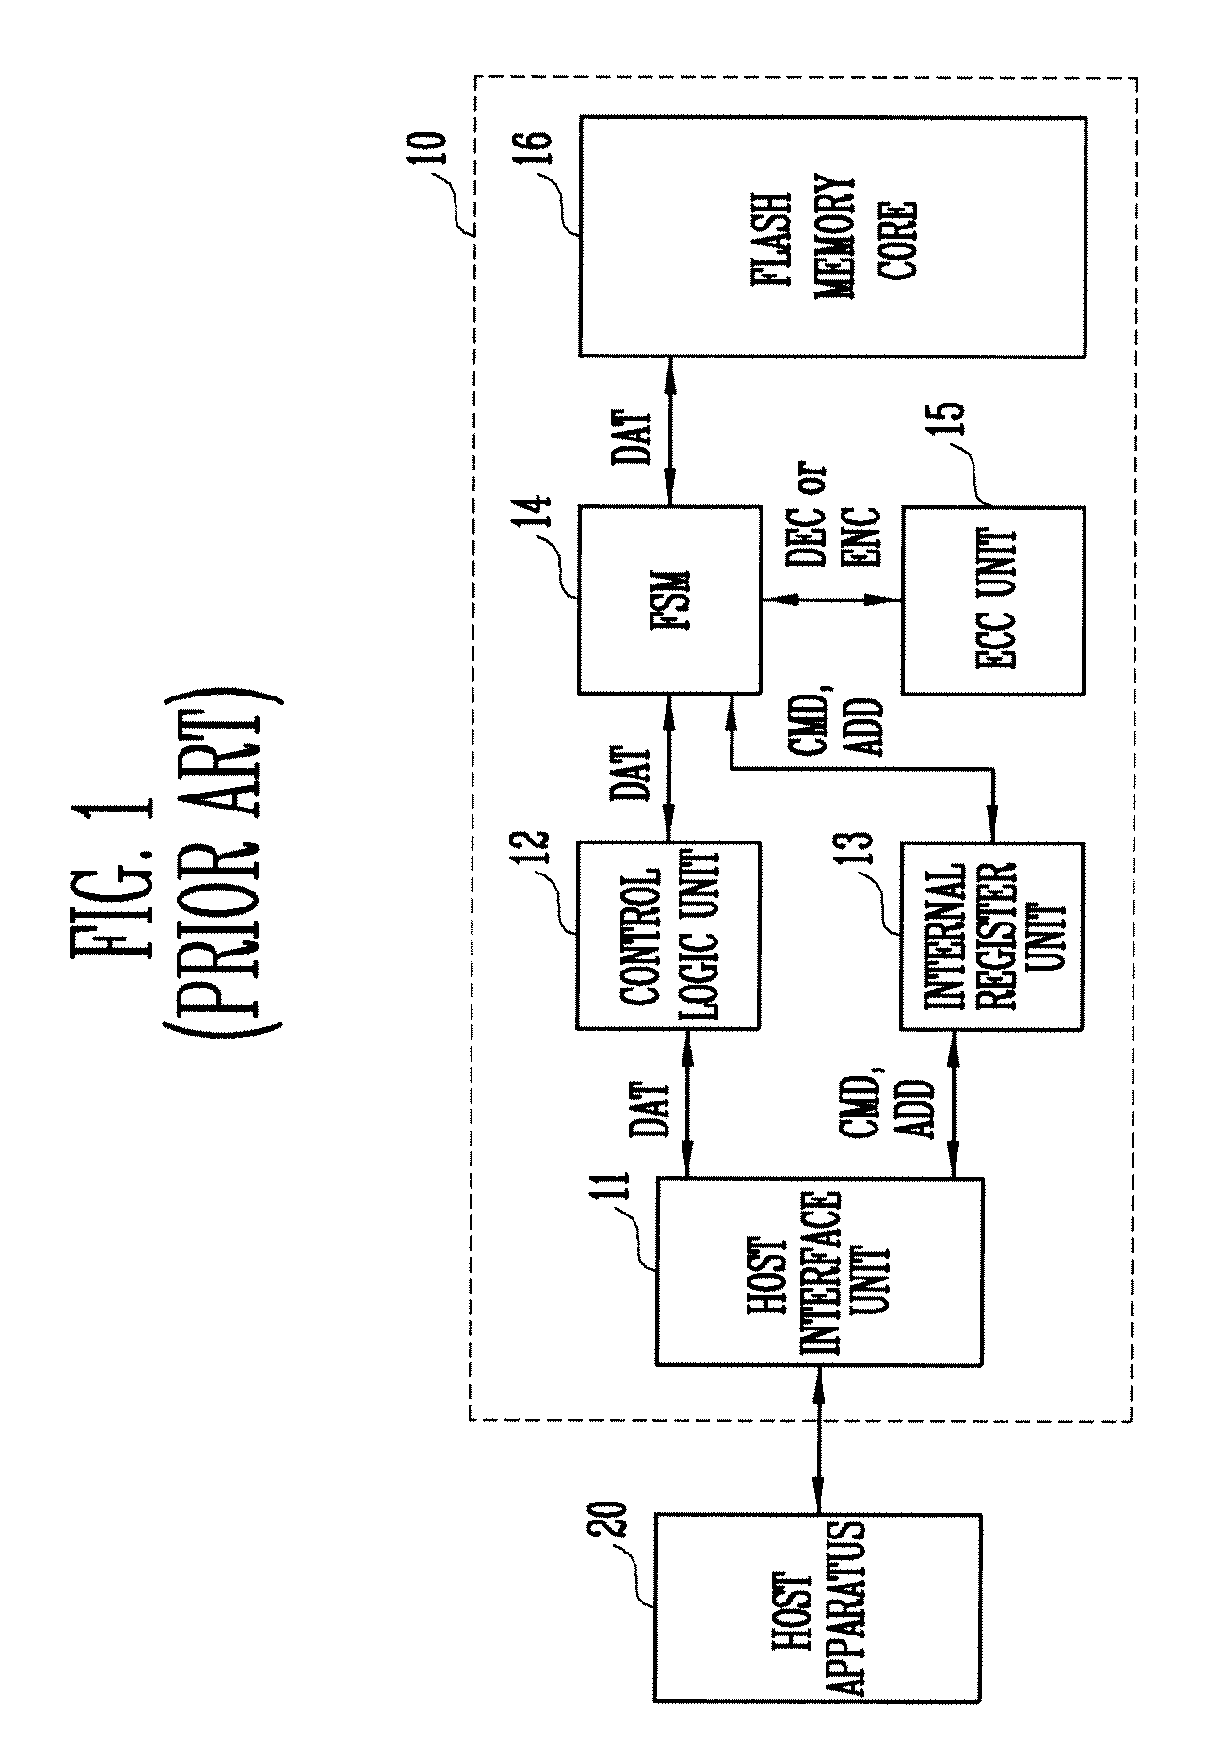 Flash memory device with reduced access time